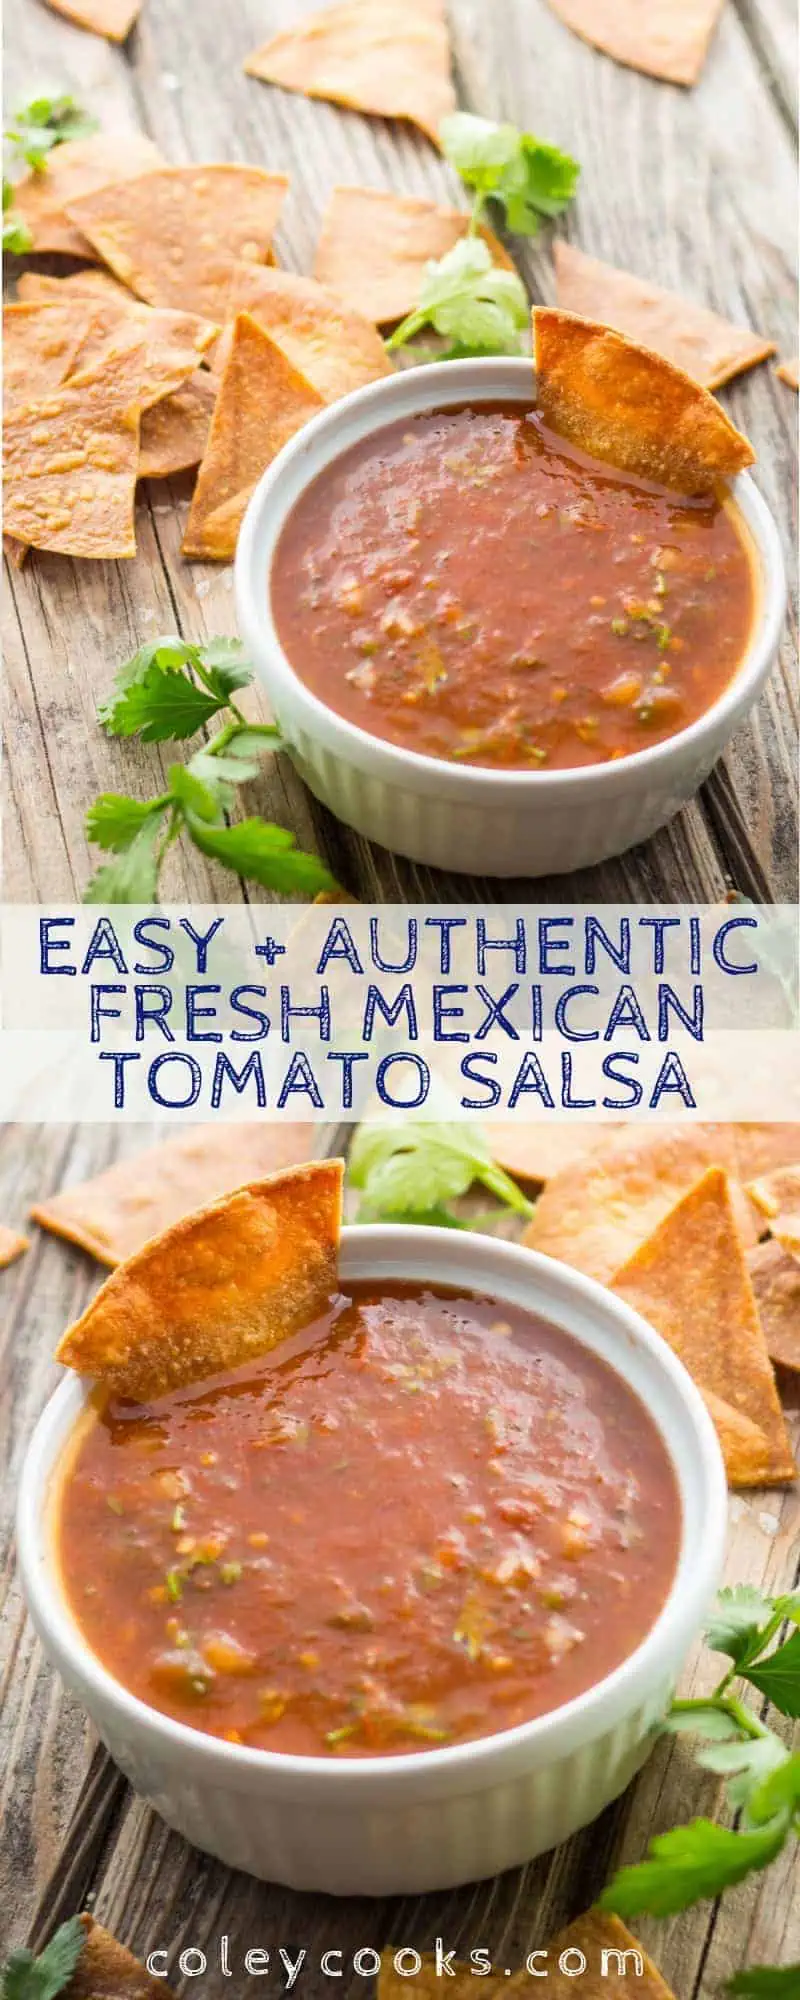 This easy recipe for Mexican Tomato Salsa is an authentic, spicy and flavorful dip for chips or a sauce for your favorite Mexican dish. Great for Cinco de Mayo! #cinco #Mexican #easy #authentic #tomato #spicy #salsa #recipe #chips #dip #snacks | ColeyCooks.com